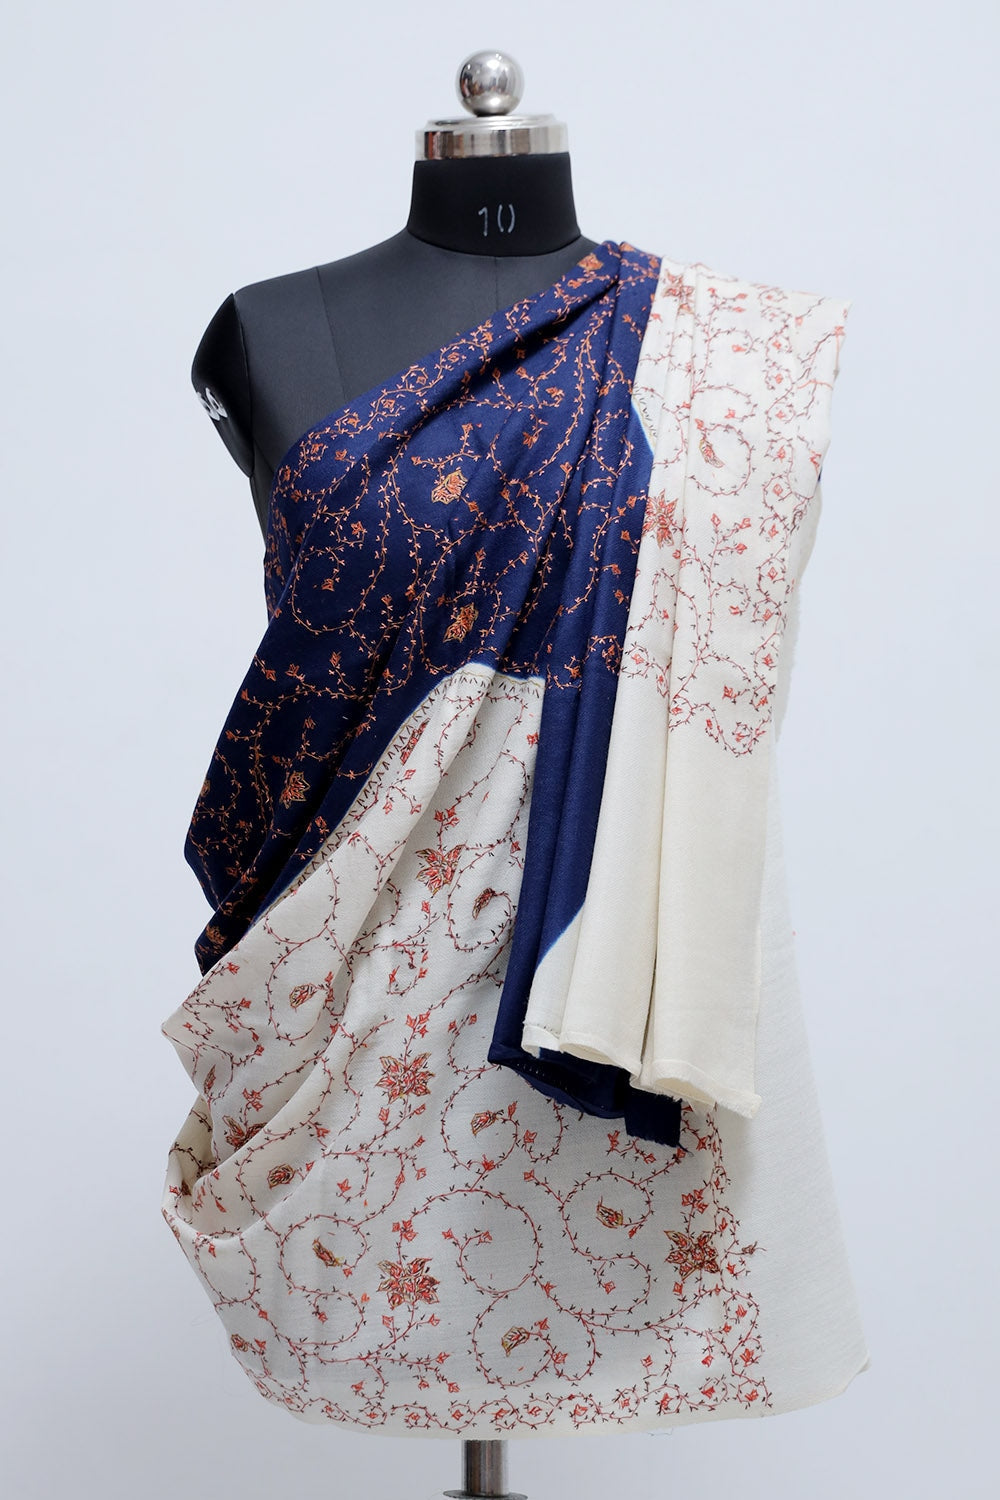 Blue- white Colour Double Shaded Concept Of This Sozni Shawl